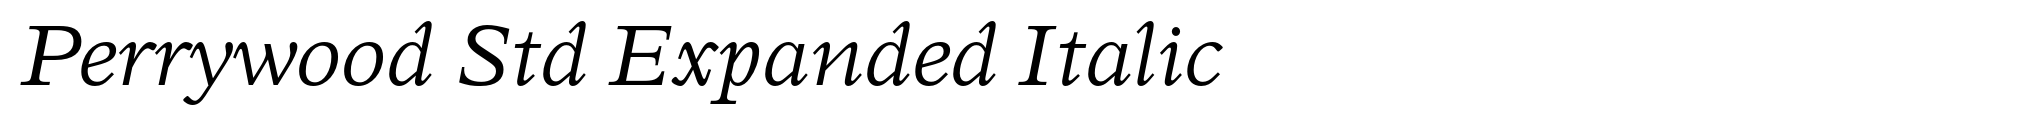 Perrywood Std Expanded Italic image